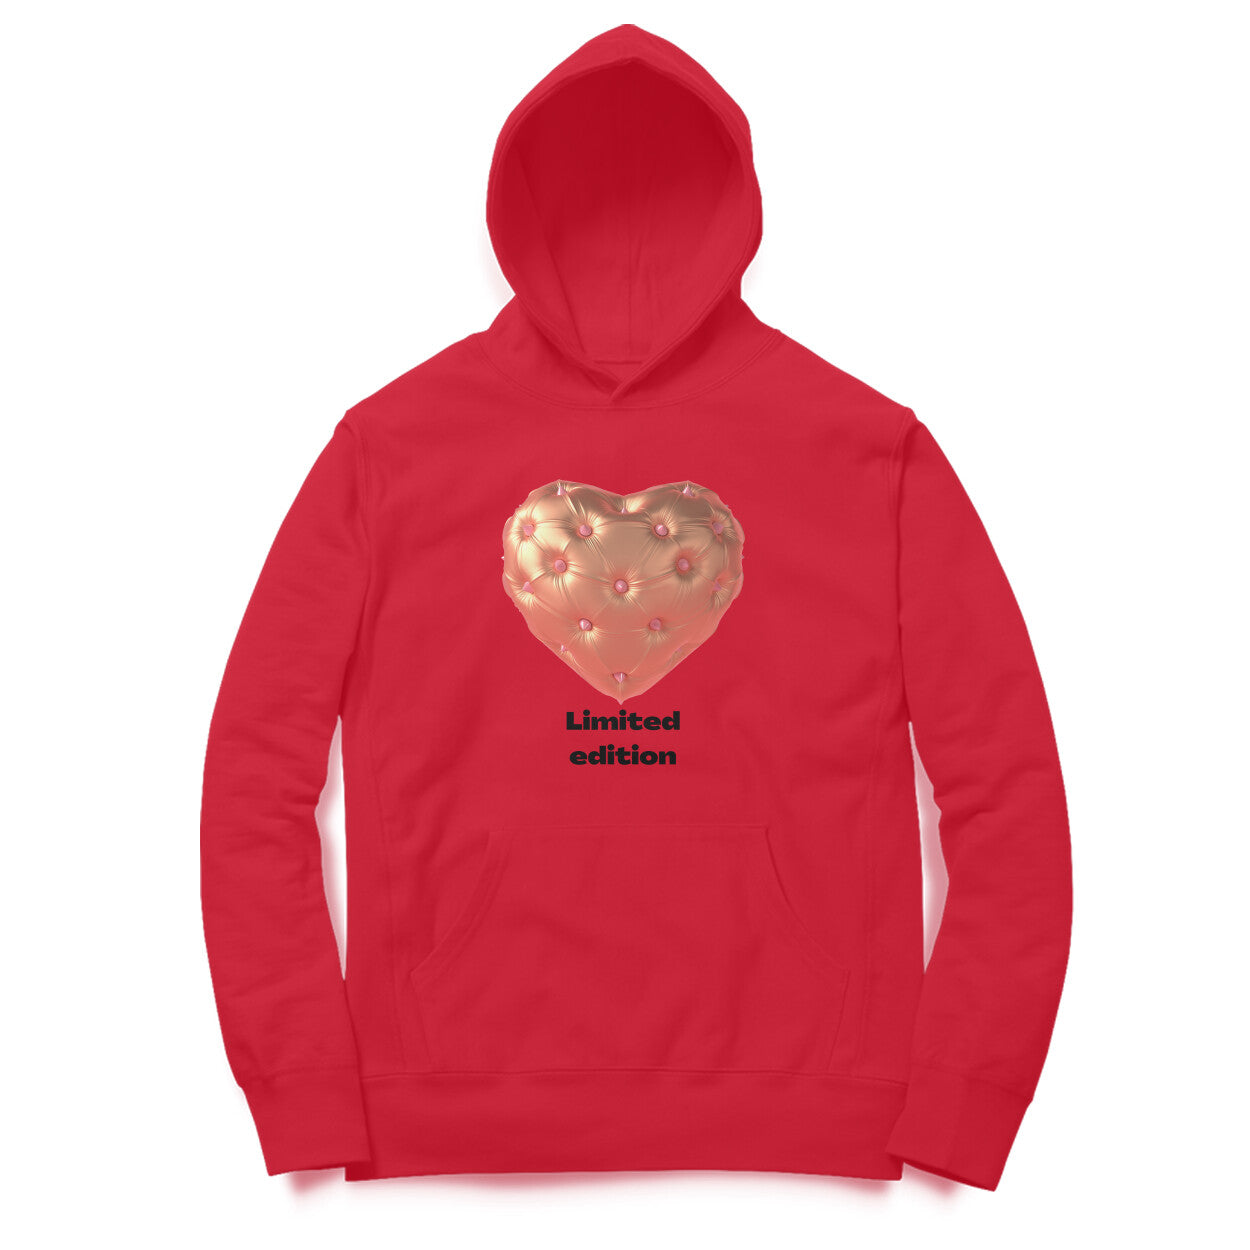 Limited edition- Hoodie